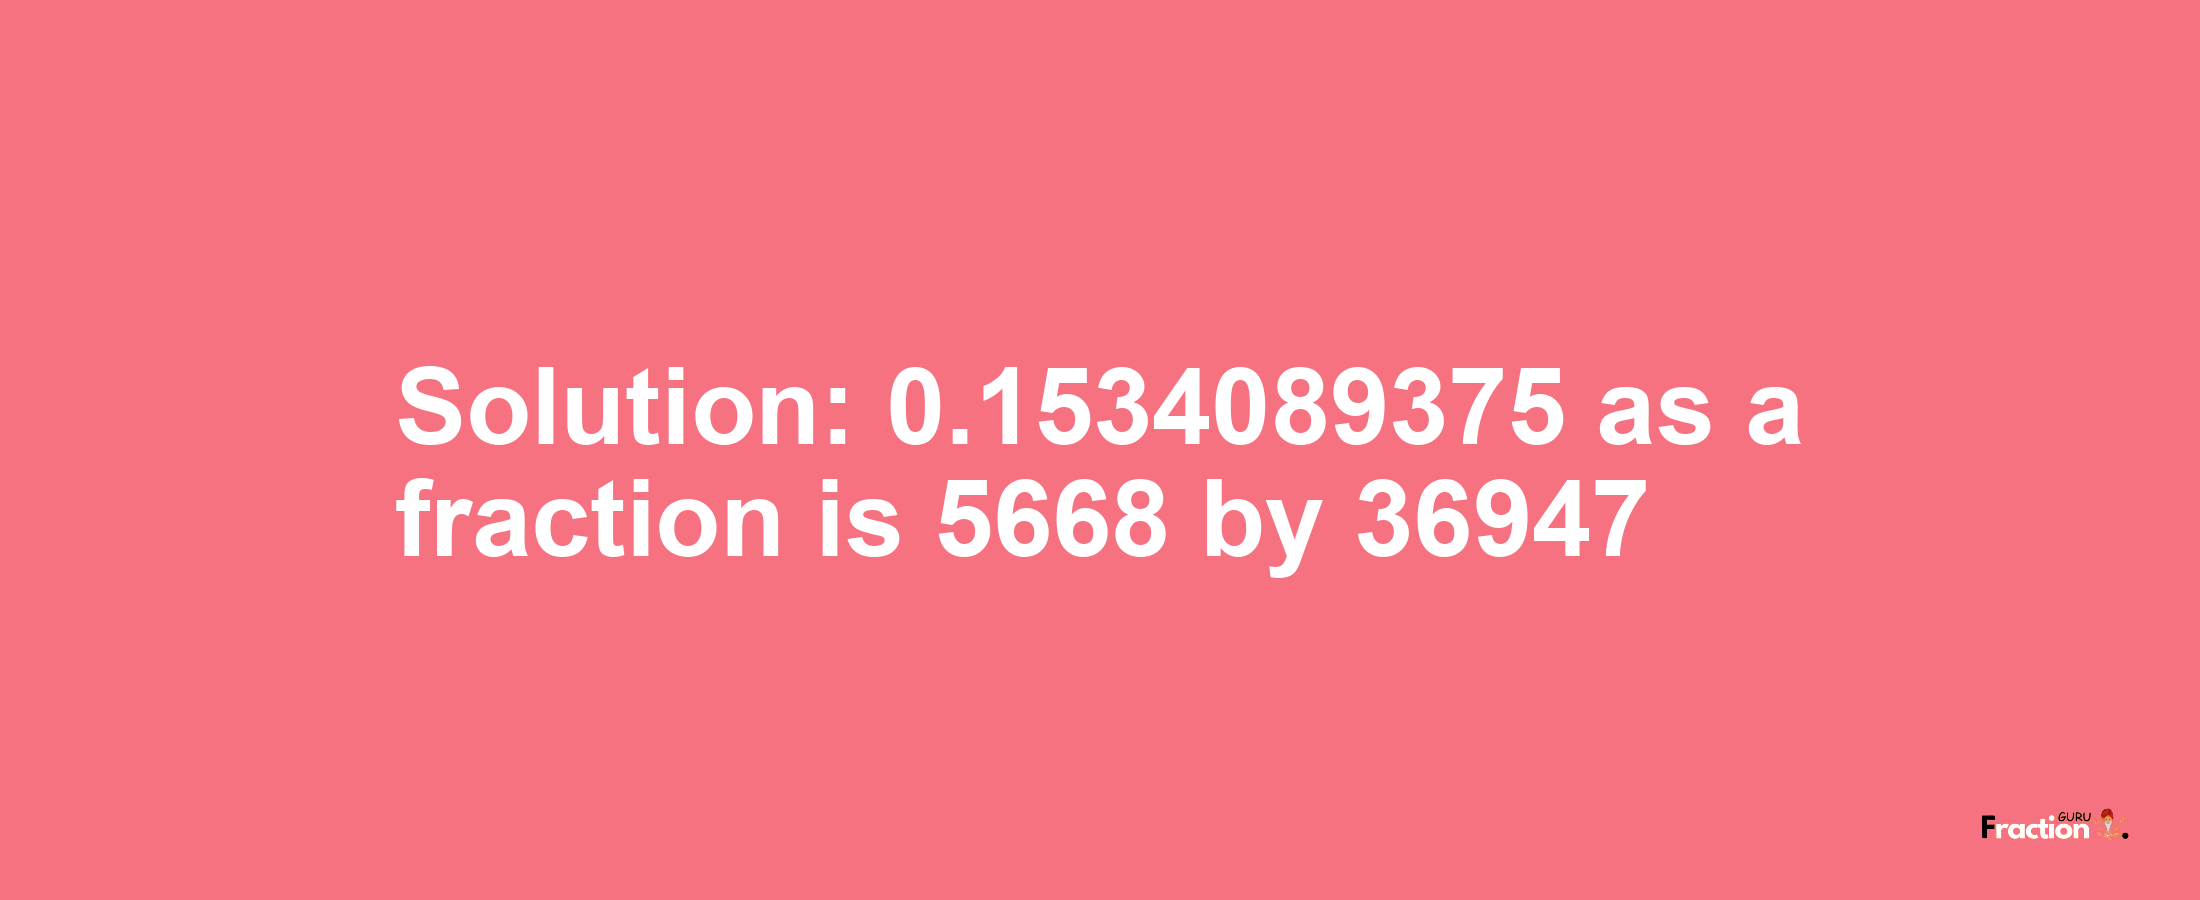 Solution:0.1534089375 as a fraction is 5668/36947